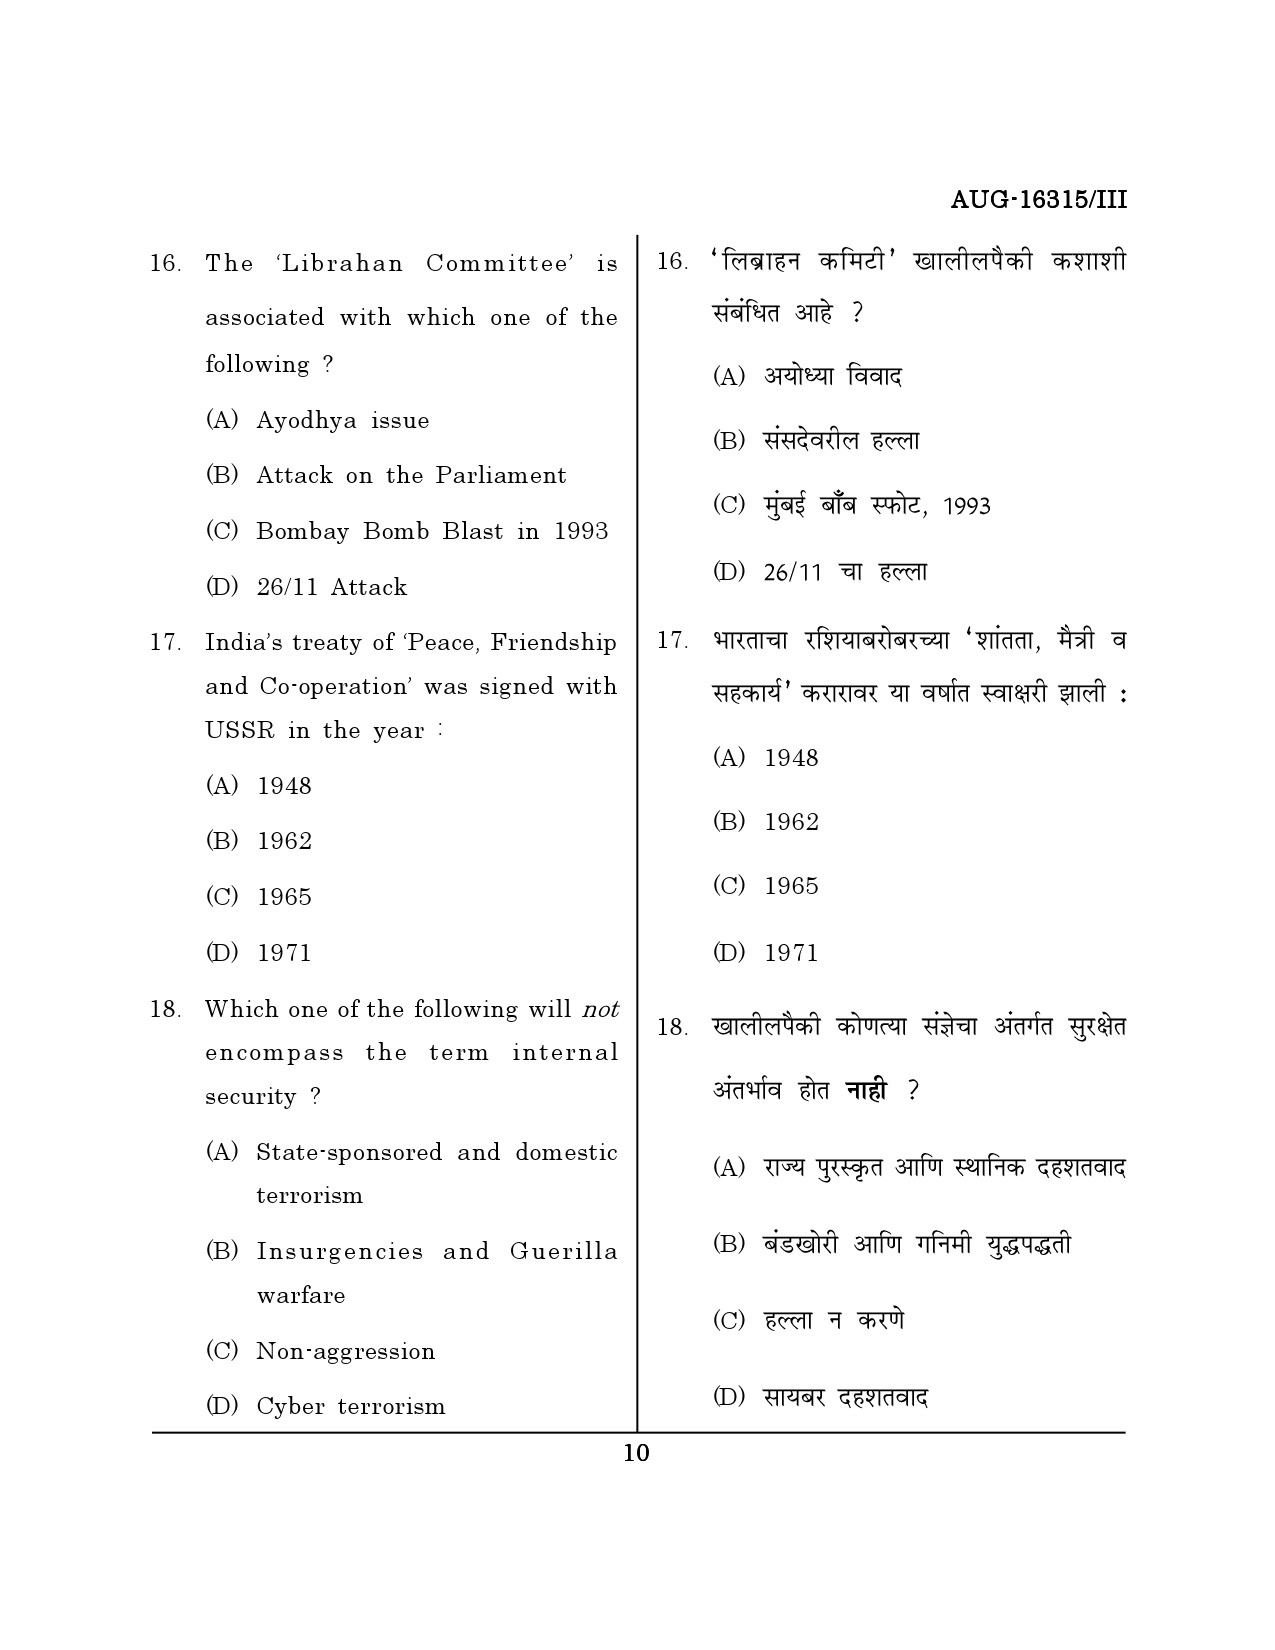 Maharashtra SET Defence and Strategic Studies Question Paper III August 2015 9